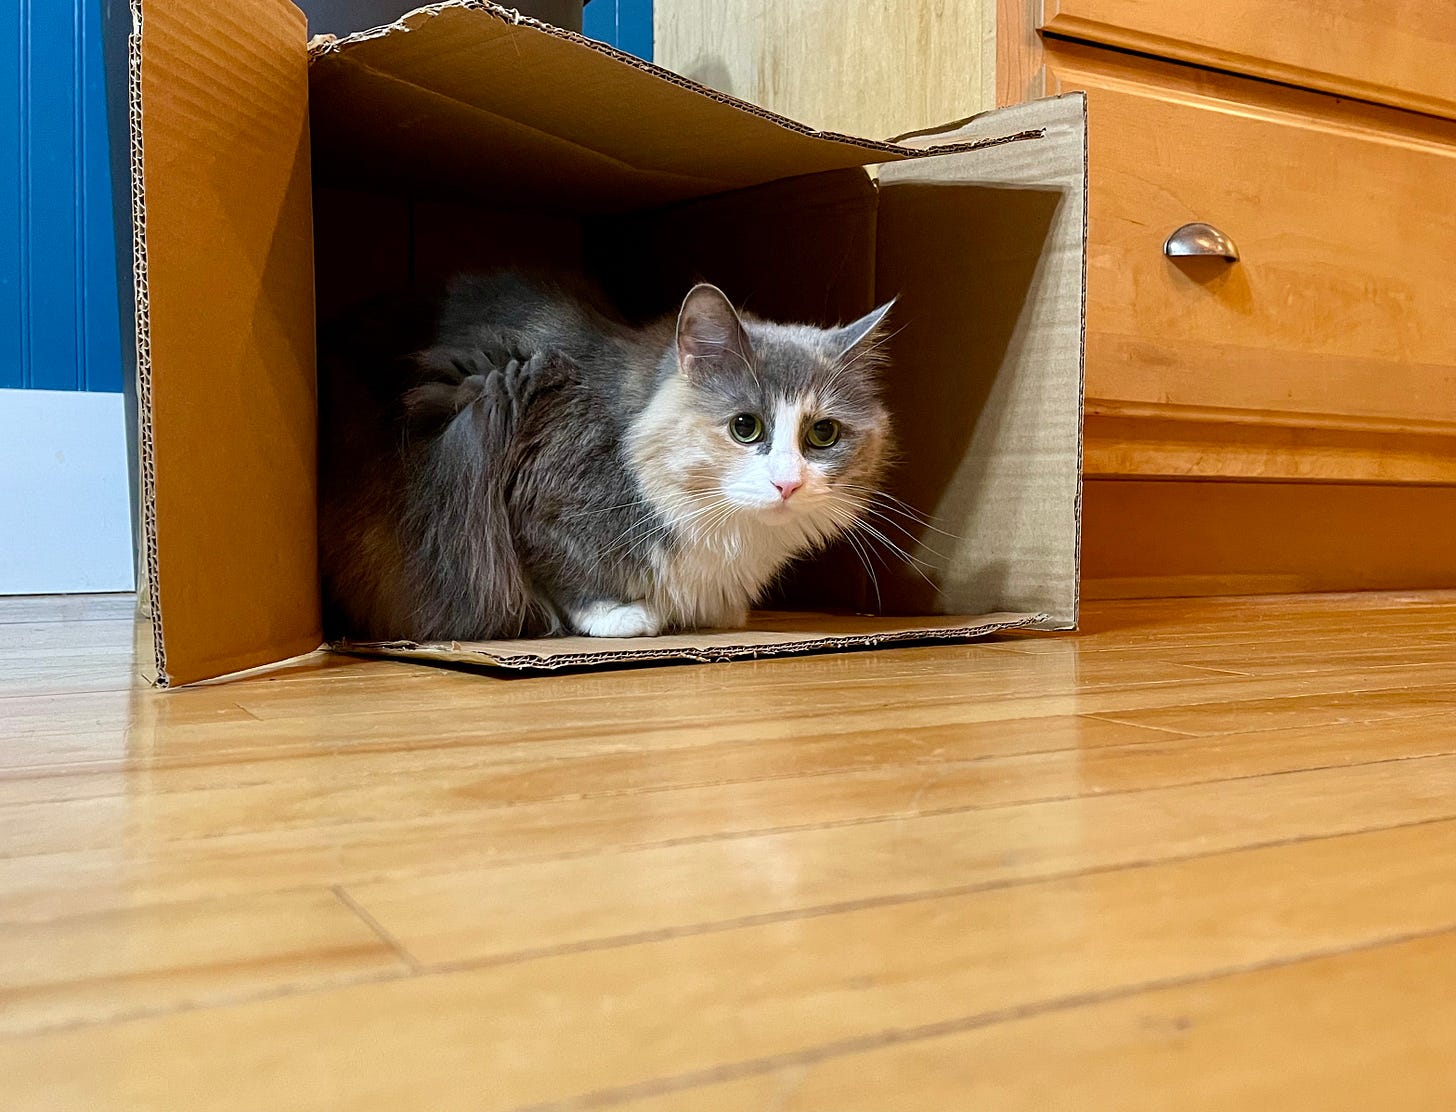 Cat peeking out of a box on a floor